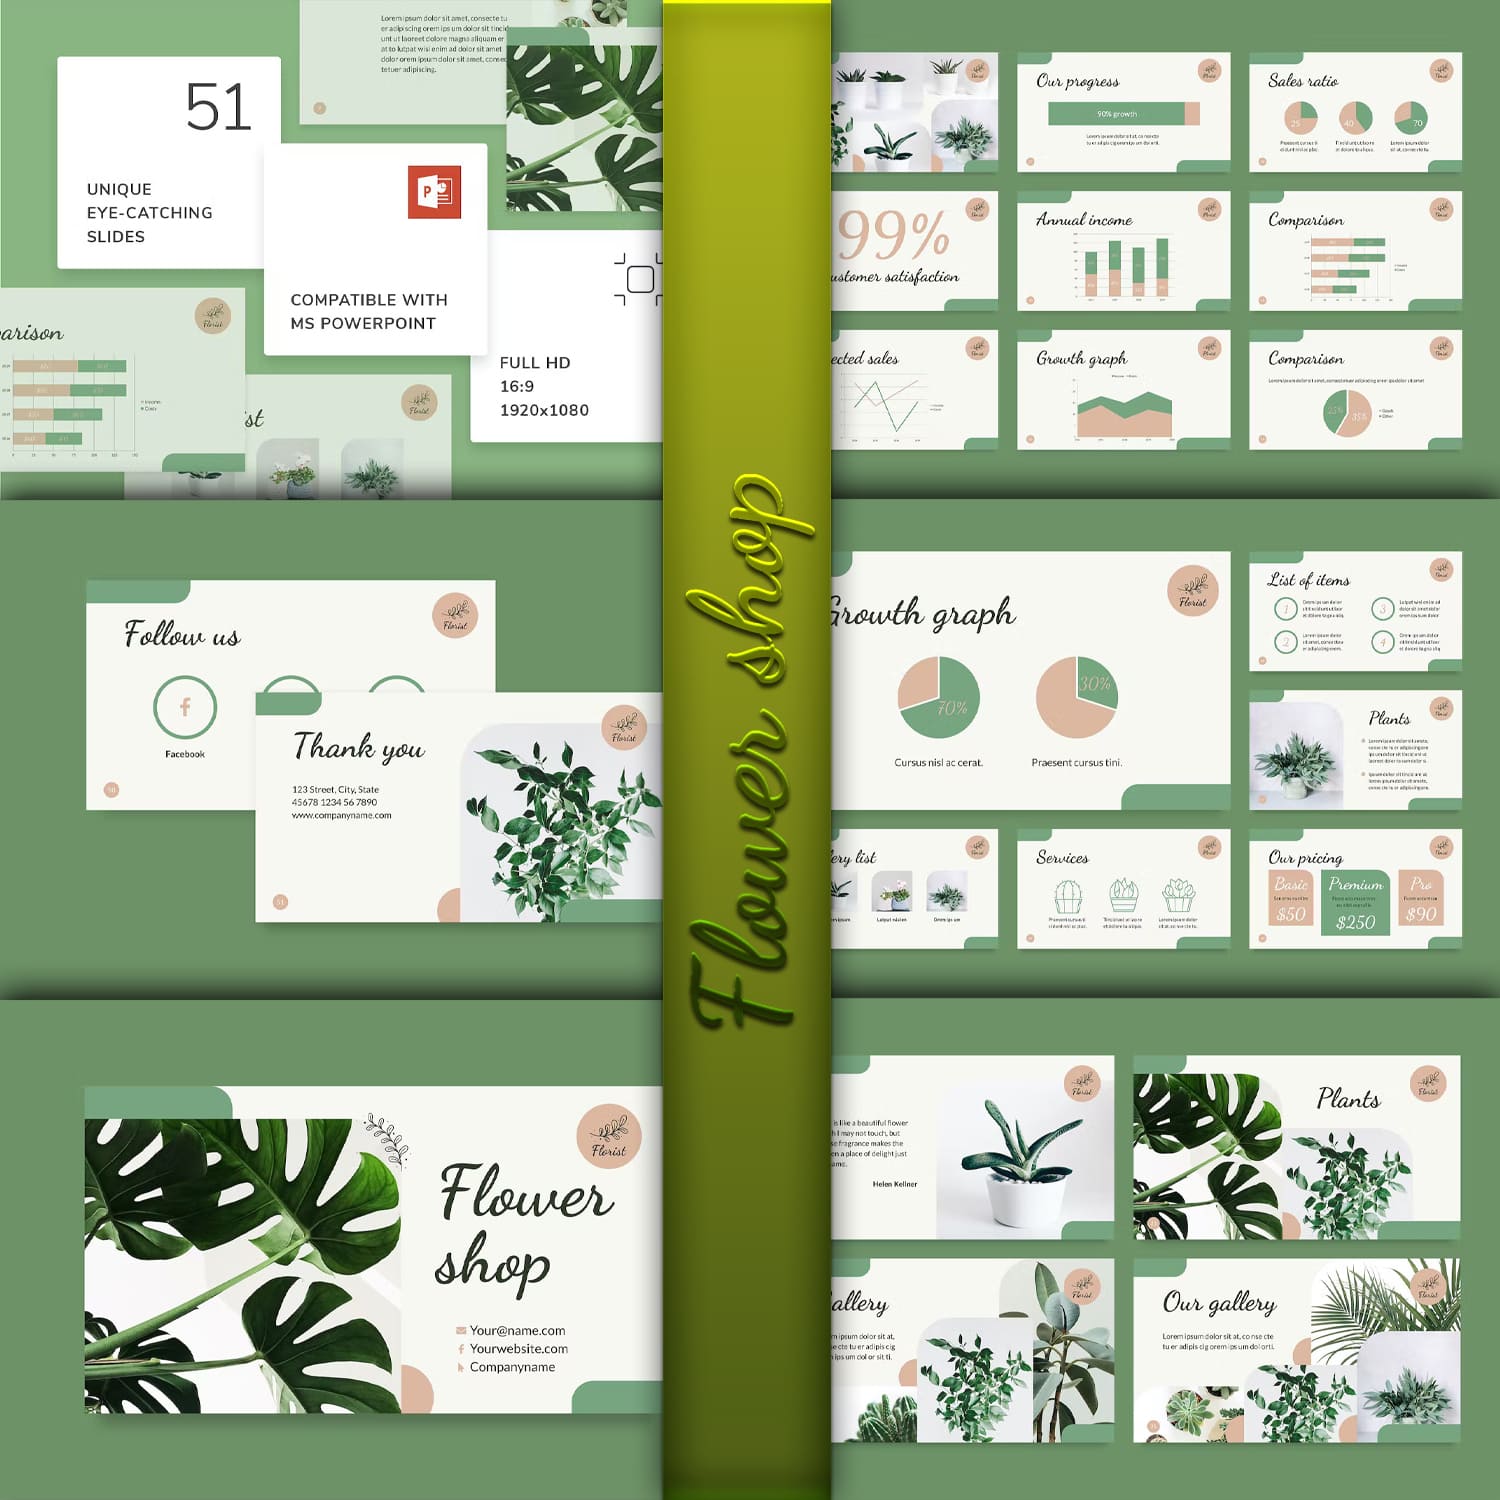 Flower Shop PowerPoint Presentation Template created by ambergraphics.